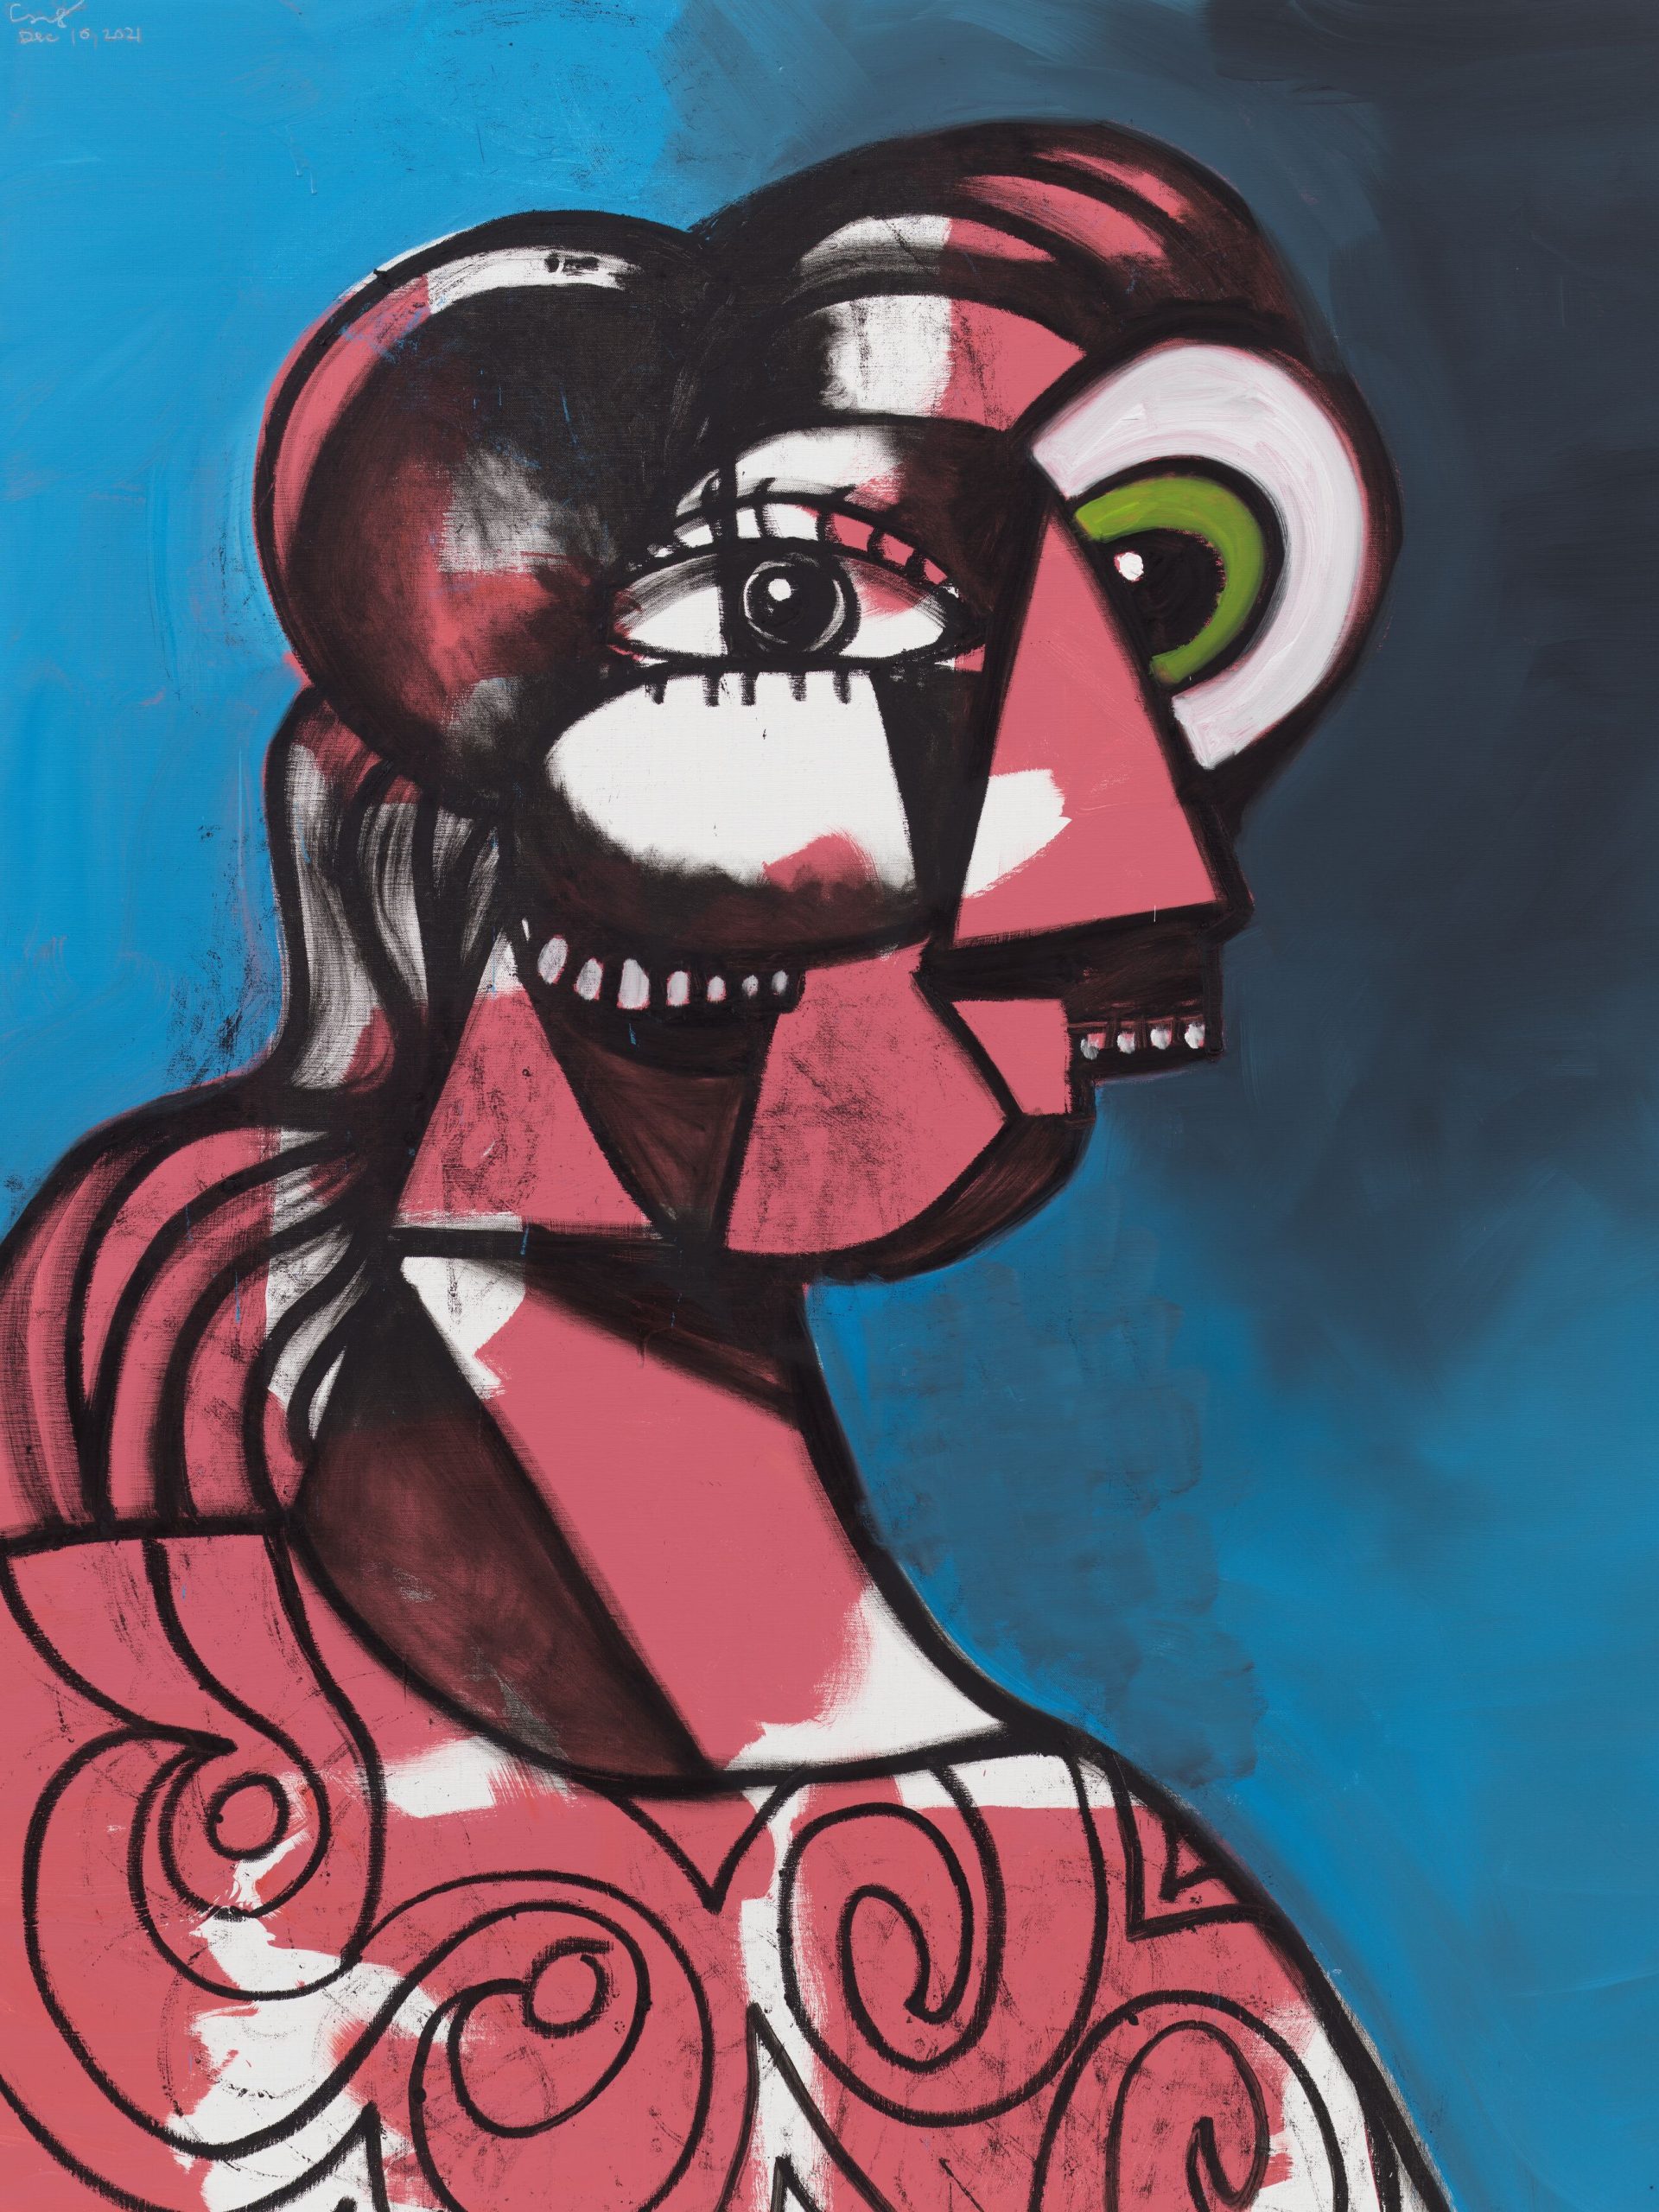 George Condo Pink and White Profile with Green Eye, 2021, Acrylic and oil stick on linen, 228.6 x 190.5 (cm) - 90.0 x 75.0 (in) USD 2,650,000 @ Hauser & Wirth